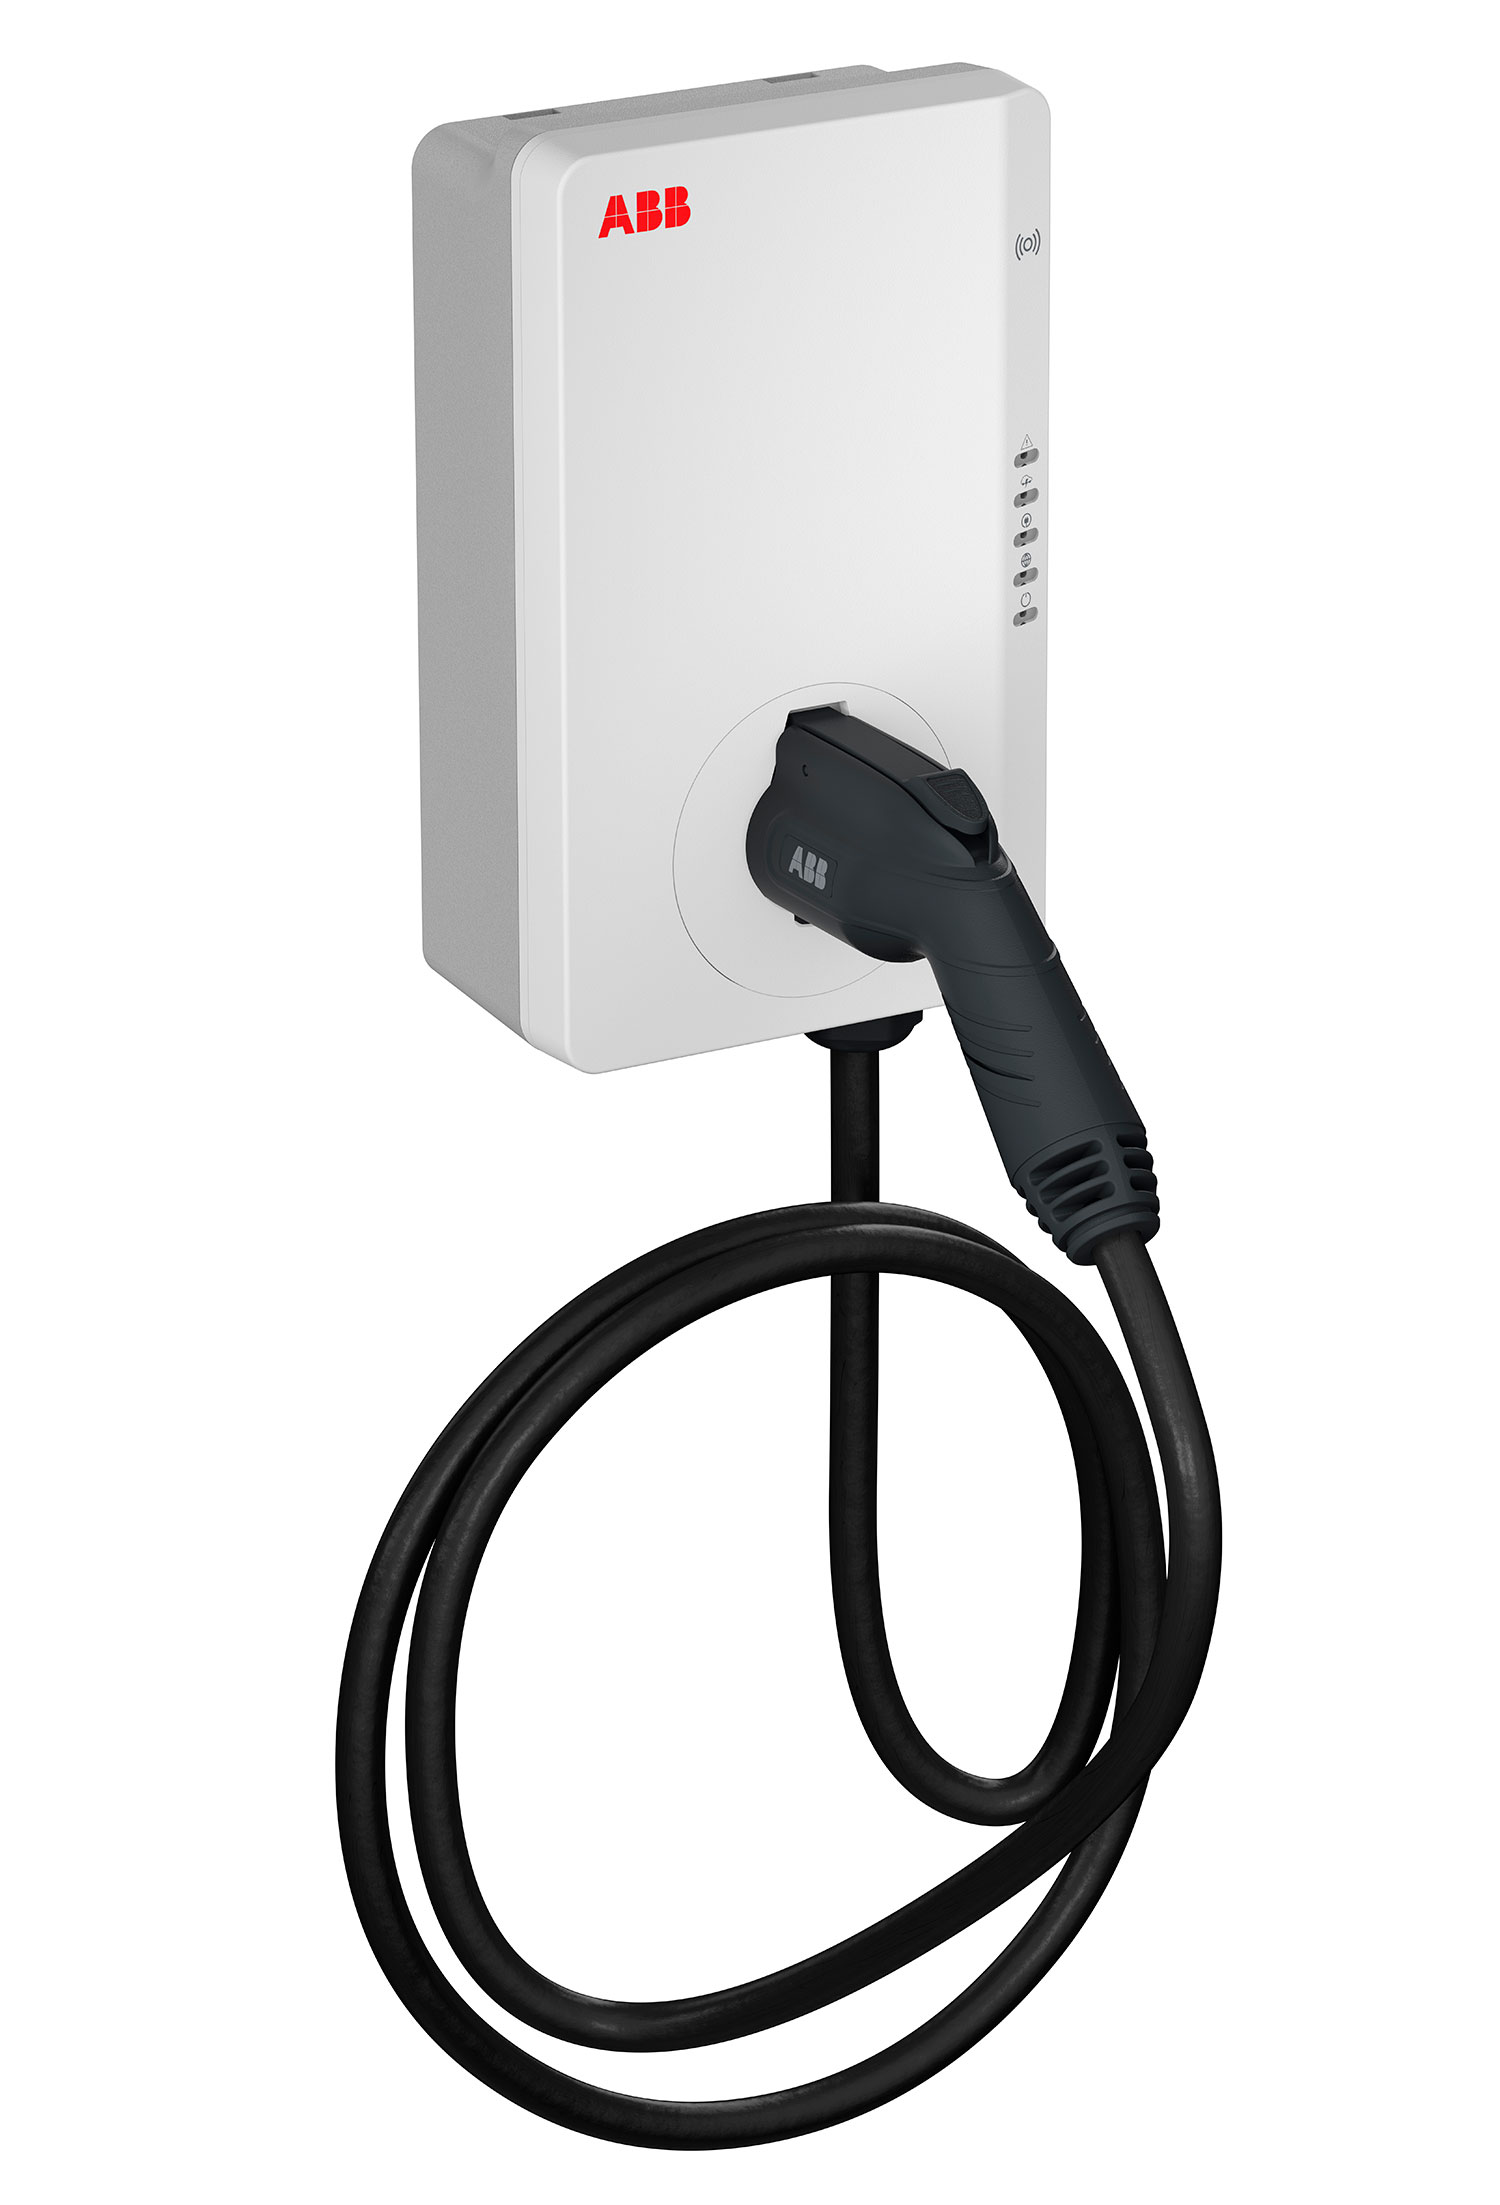 ABB Juno Type1 cable HR ABB Terra AC 7kW EV Charger